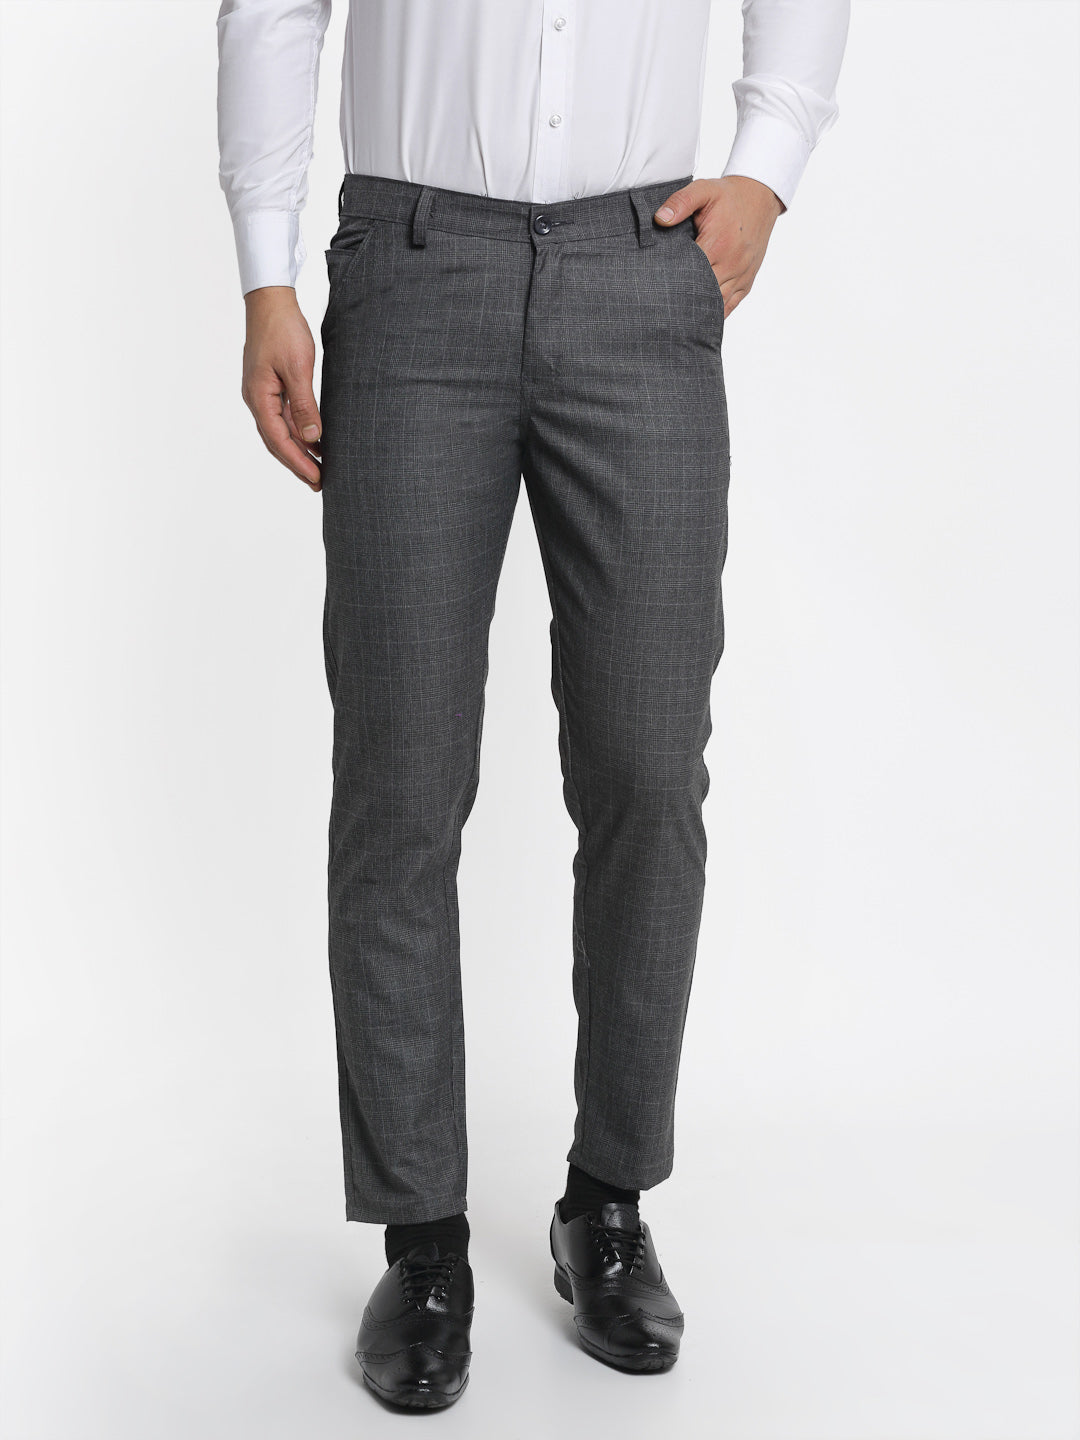 Men's Charcoal Checked Formal Trousers ( FGP 266Charcoal ) - Jainish